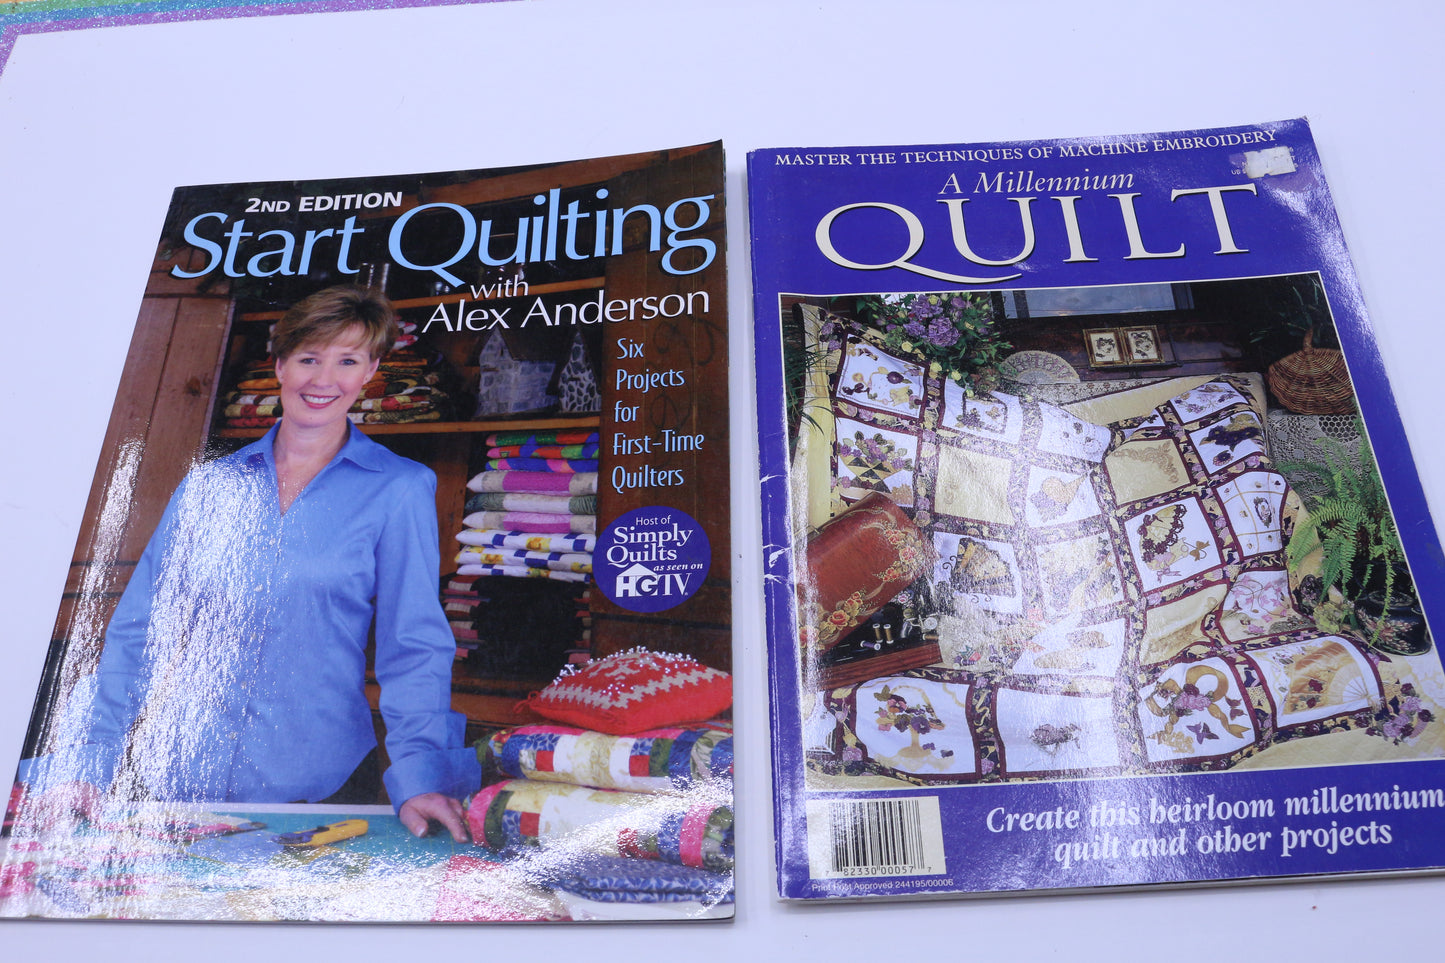 Start Quilting with Alex Anderson or A Millennium Quilt